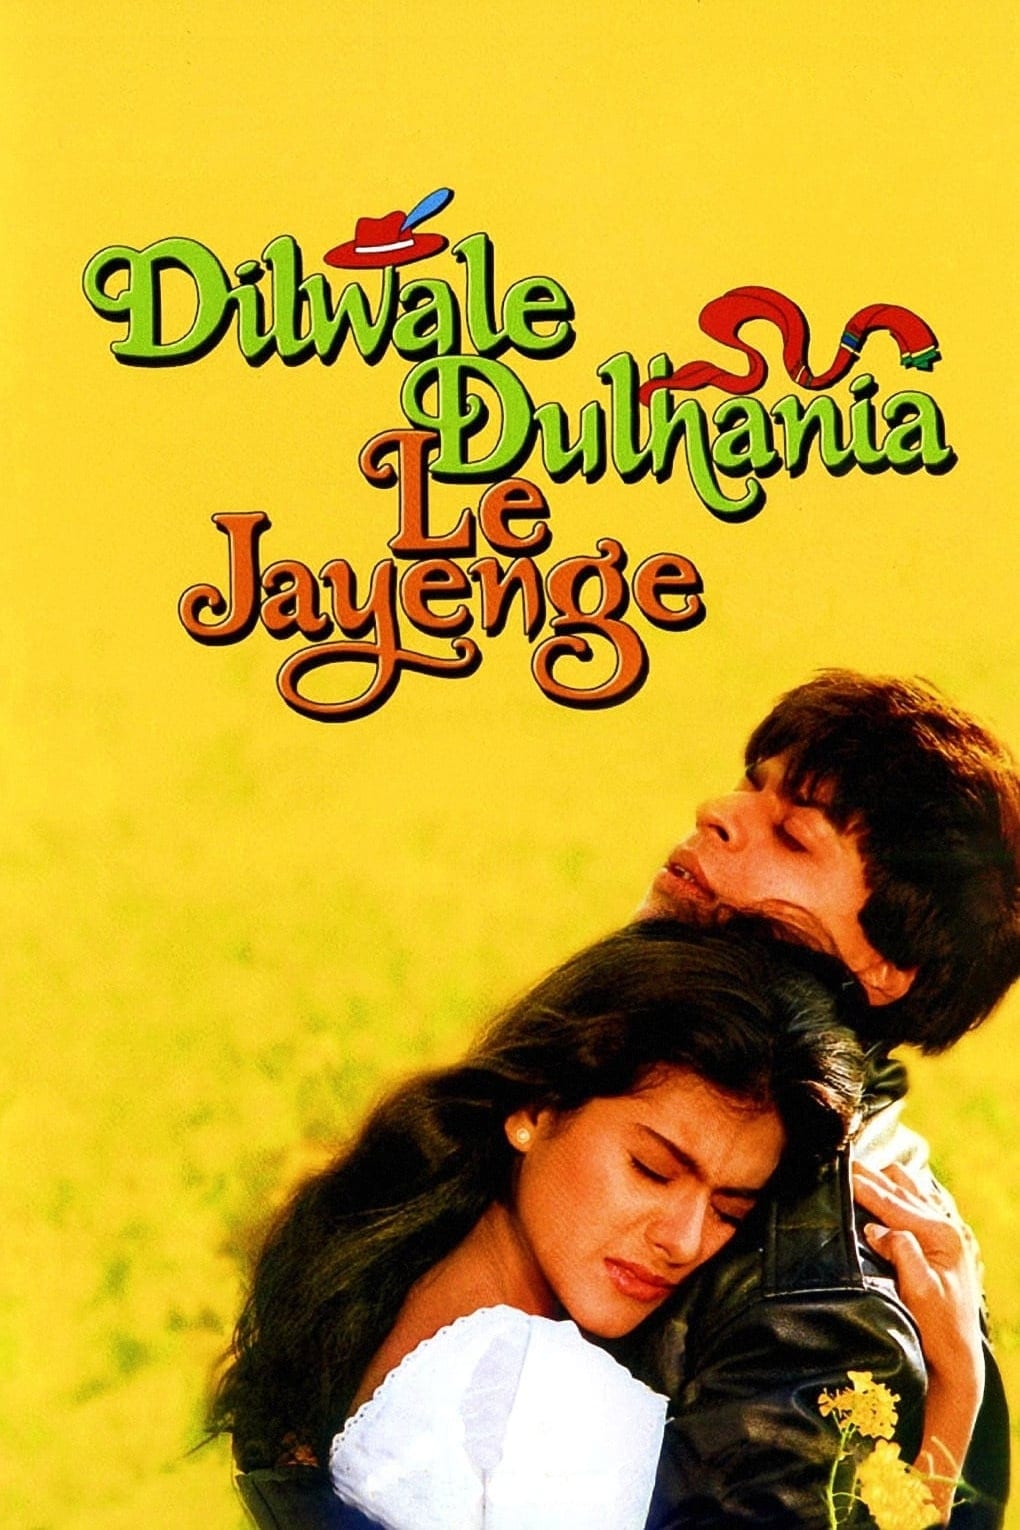 Poster for the movie "Dilwale Dulhania Le Jayenge"